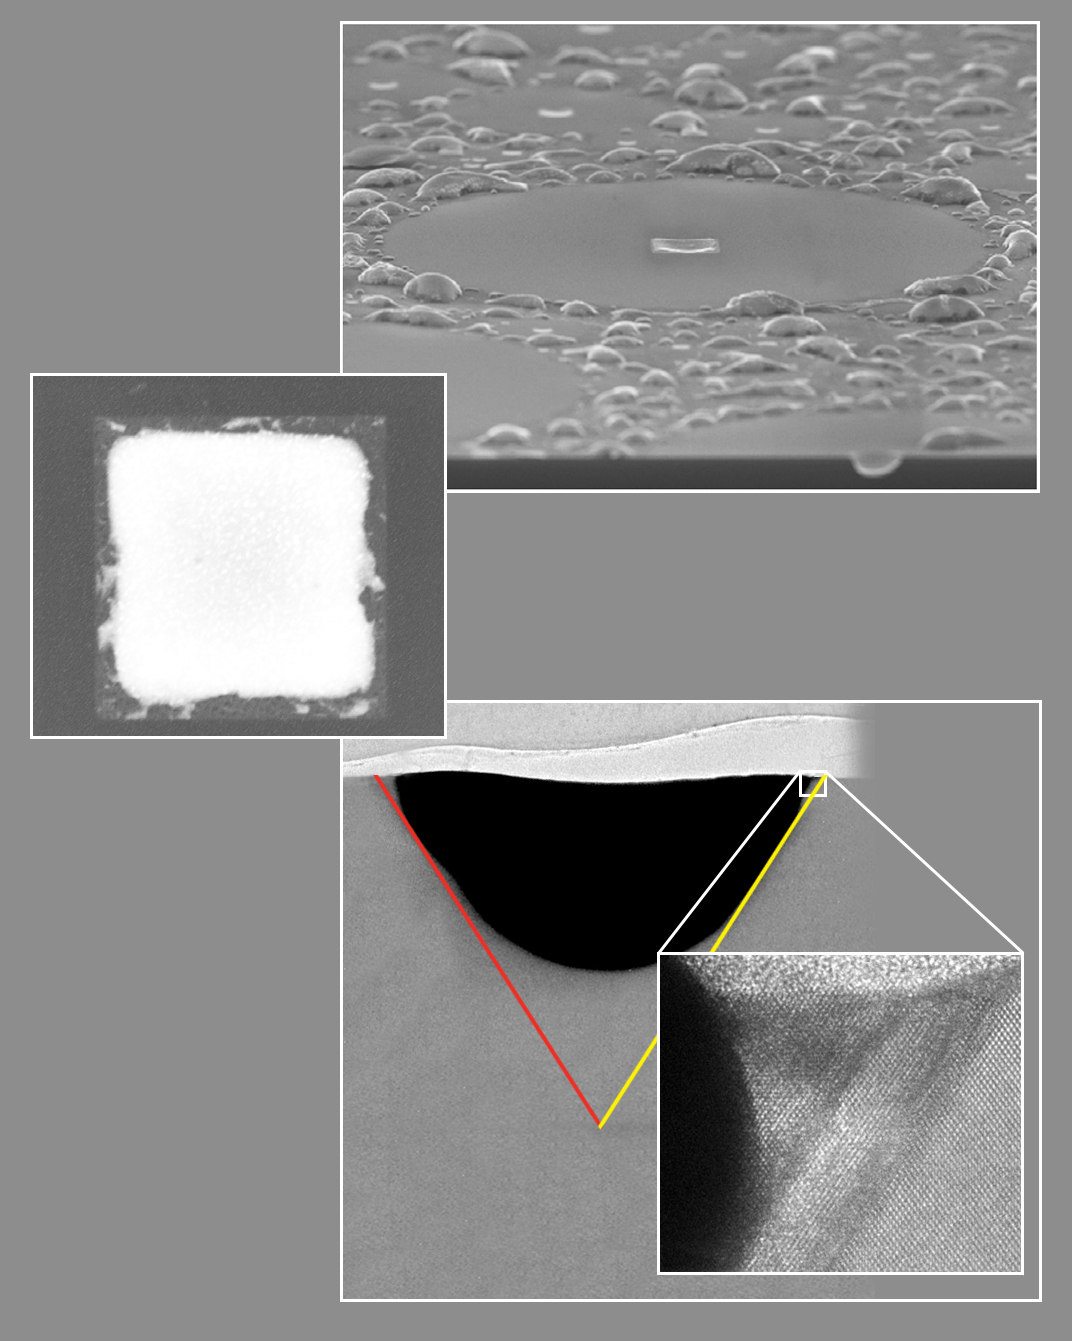 Eutectic alloy debris surrounds a circular denuded zone it once filled (top). The original source of the eutectic (center) is marked by a perfect outer square of silicon and an irregular inner square of gold, alloy components now separated after cooling. A side view reveals the structure beneath the square, a pyramid whose sides lie along the low-energy planes of the silicon substrate. While the gold (dark gray) has retreated upon separation, a layer of regrown silicon is visible in the high-resolution inset image (made with a transmission electron microscope), which precisely follows the crystal planes of the substrate at far right. 